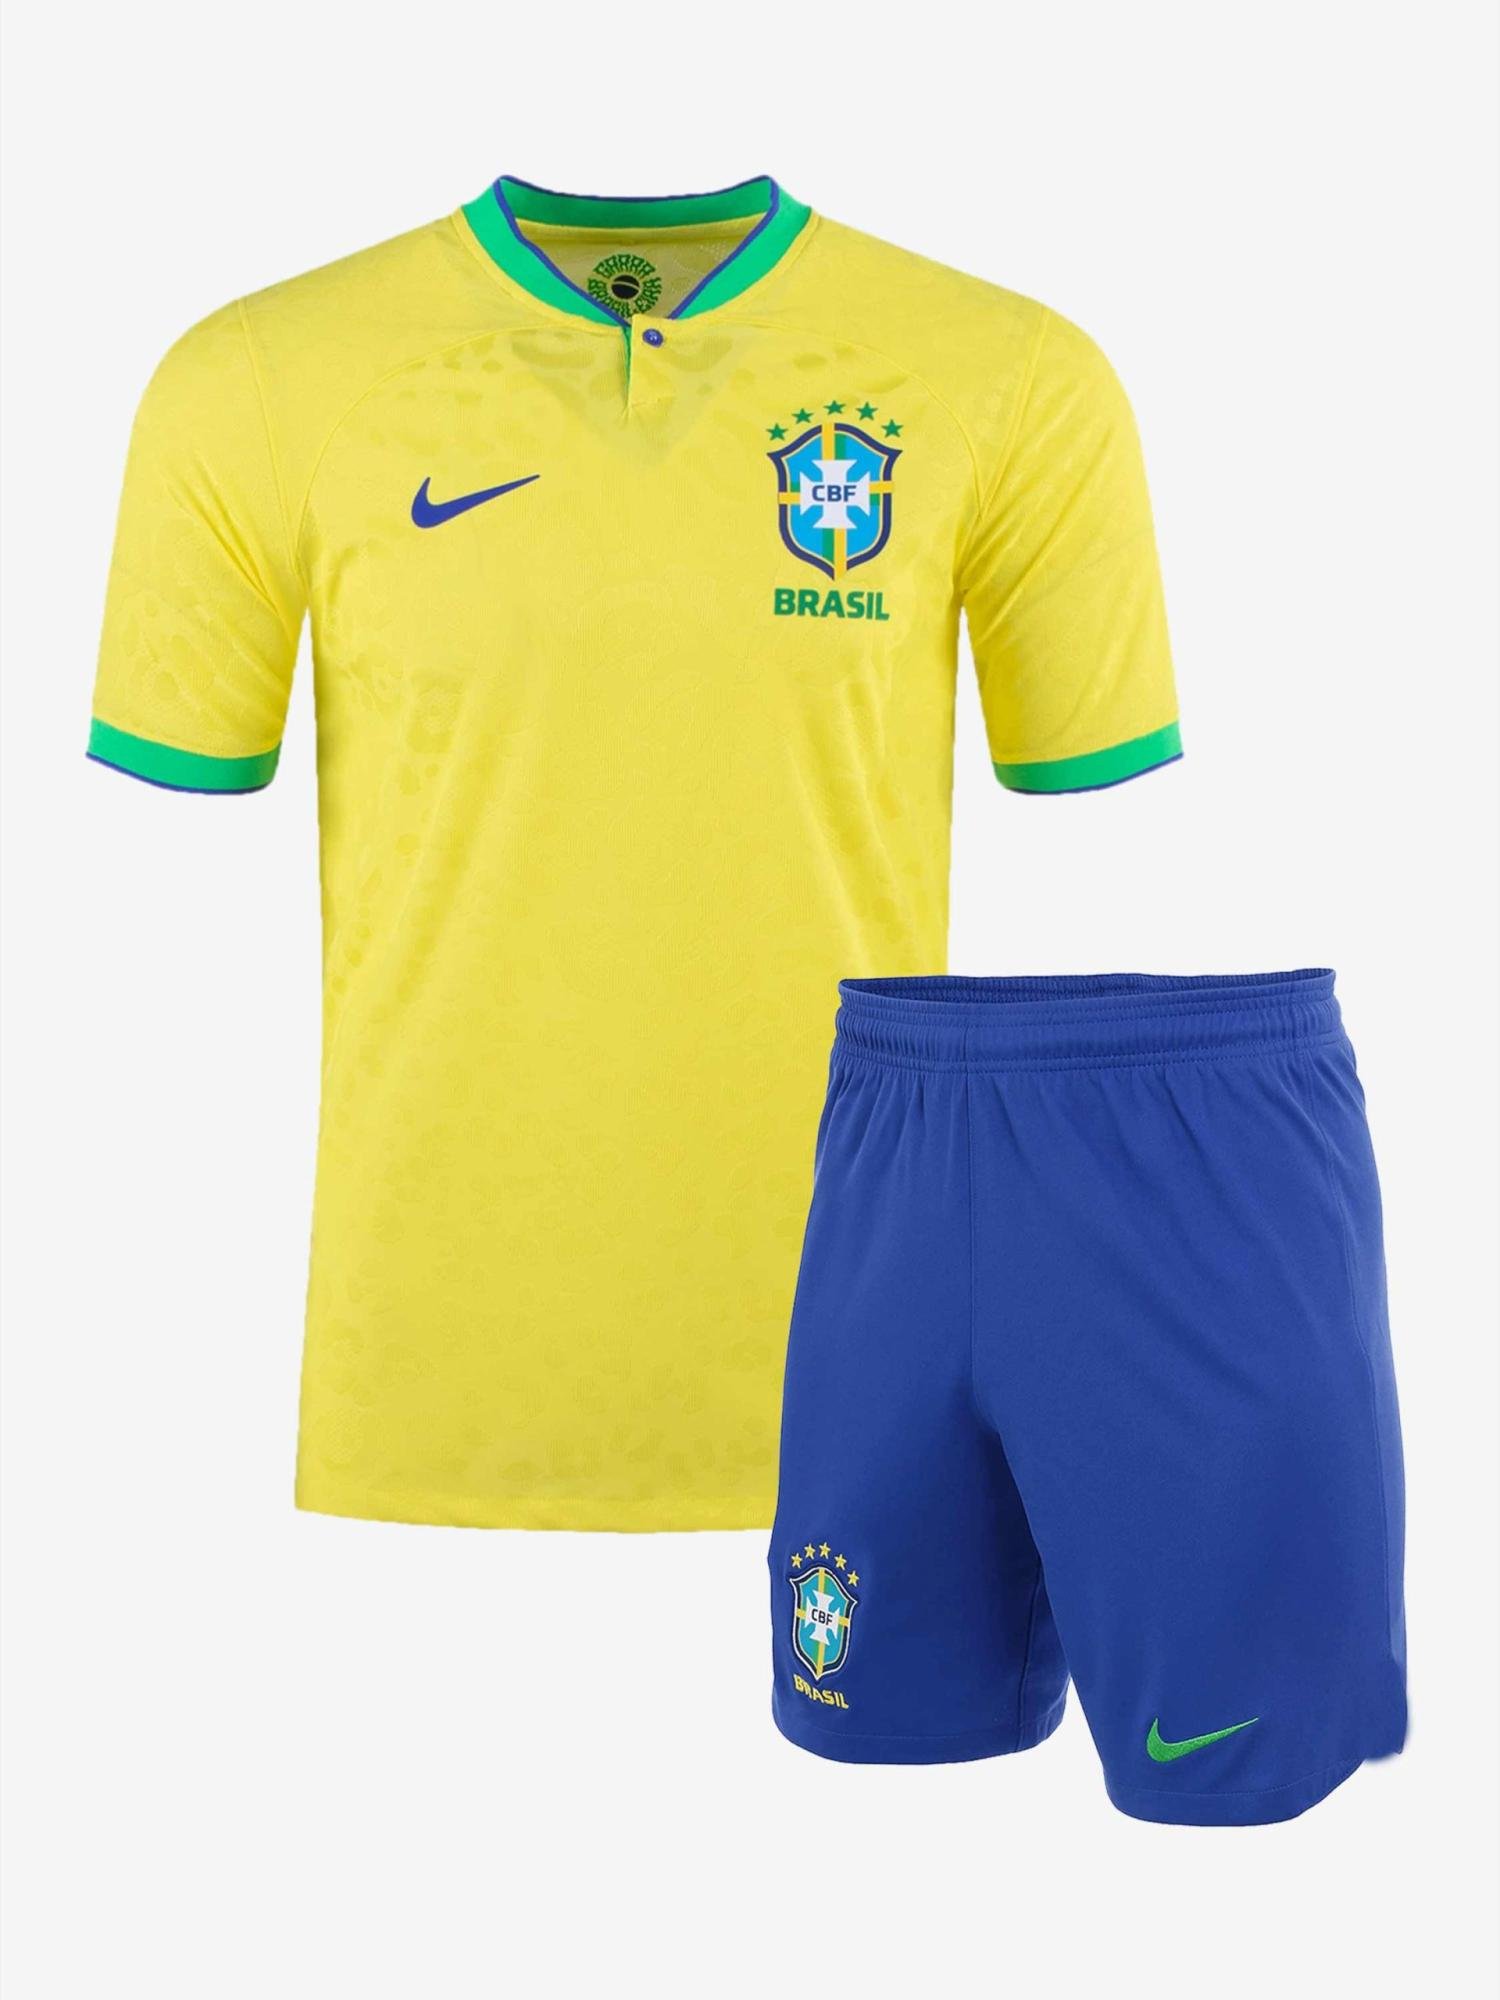 Kitbag Brazil Soccer Jersey with Matching Shorts India